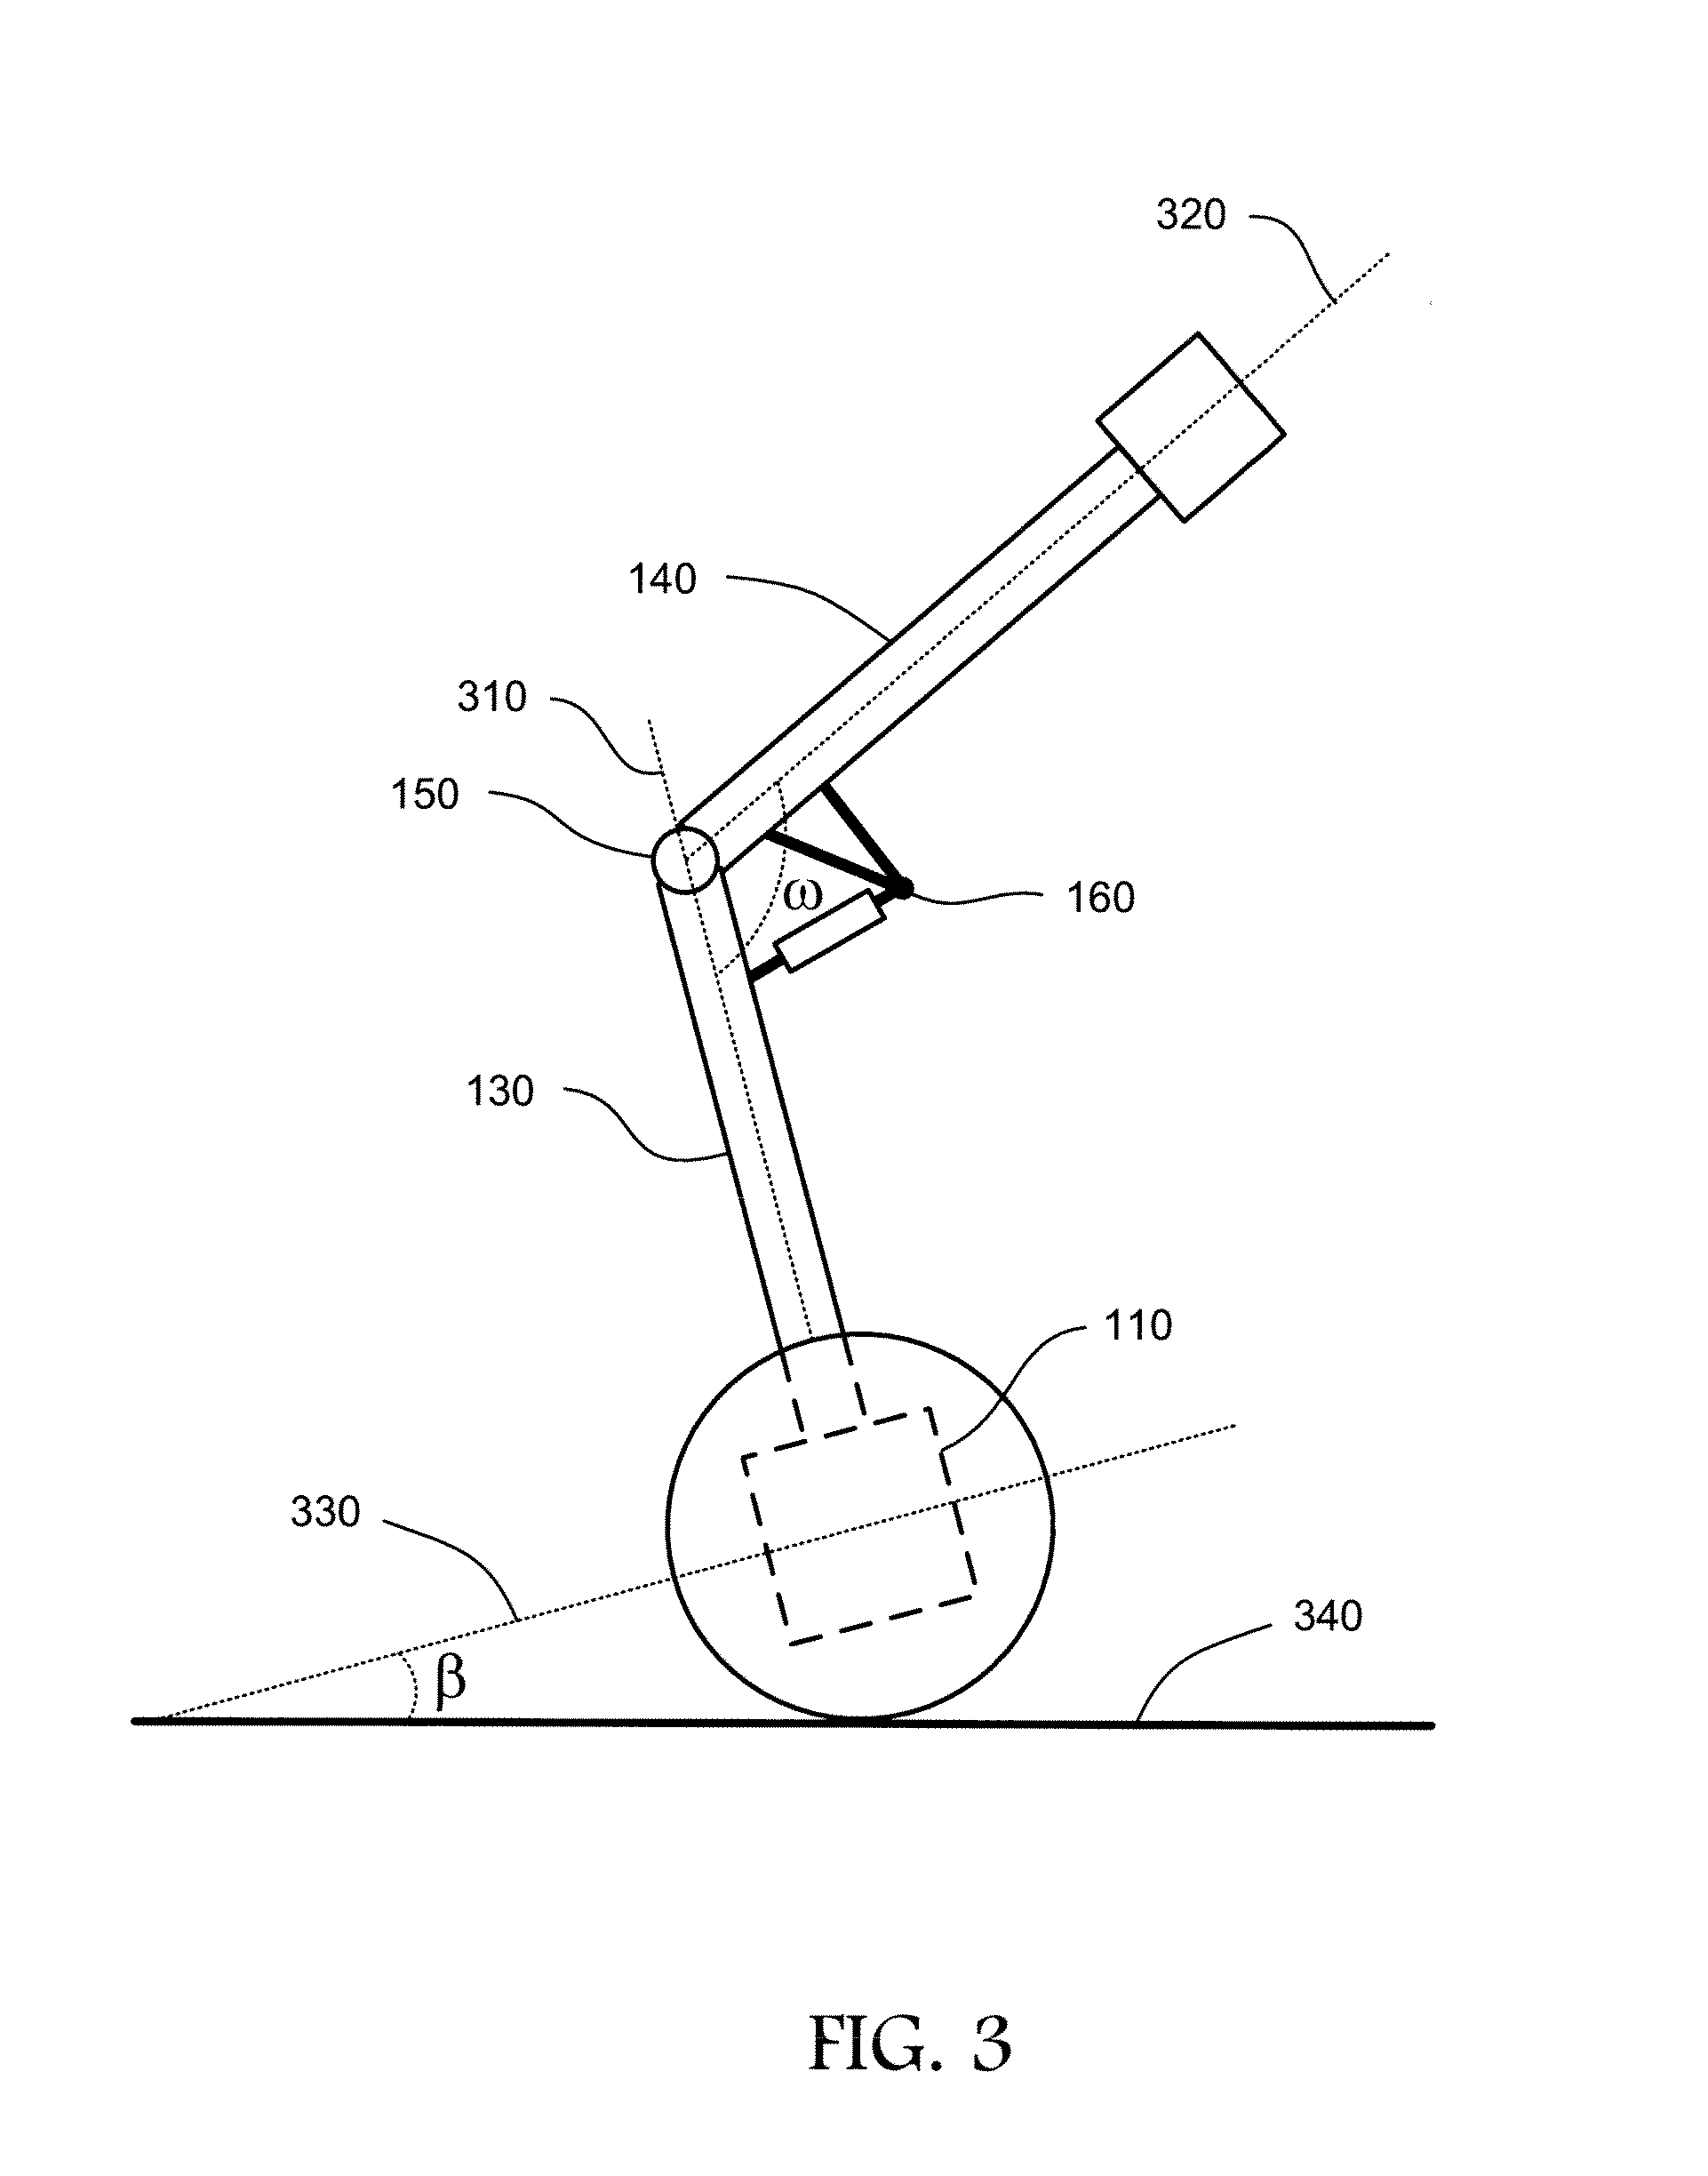 Remotely controlled self-balancing robot including a stabilized laser pointer